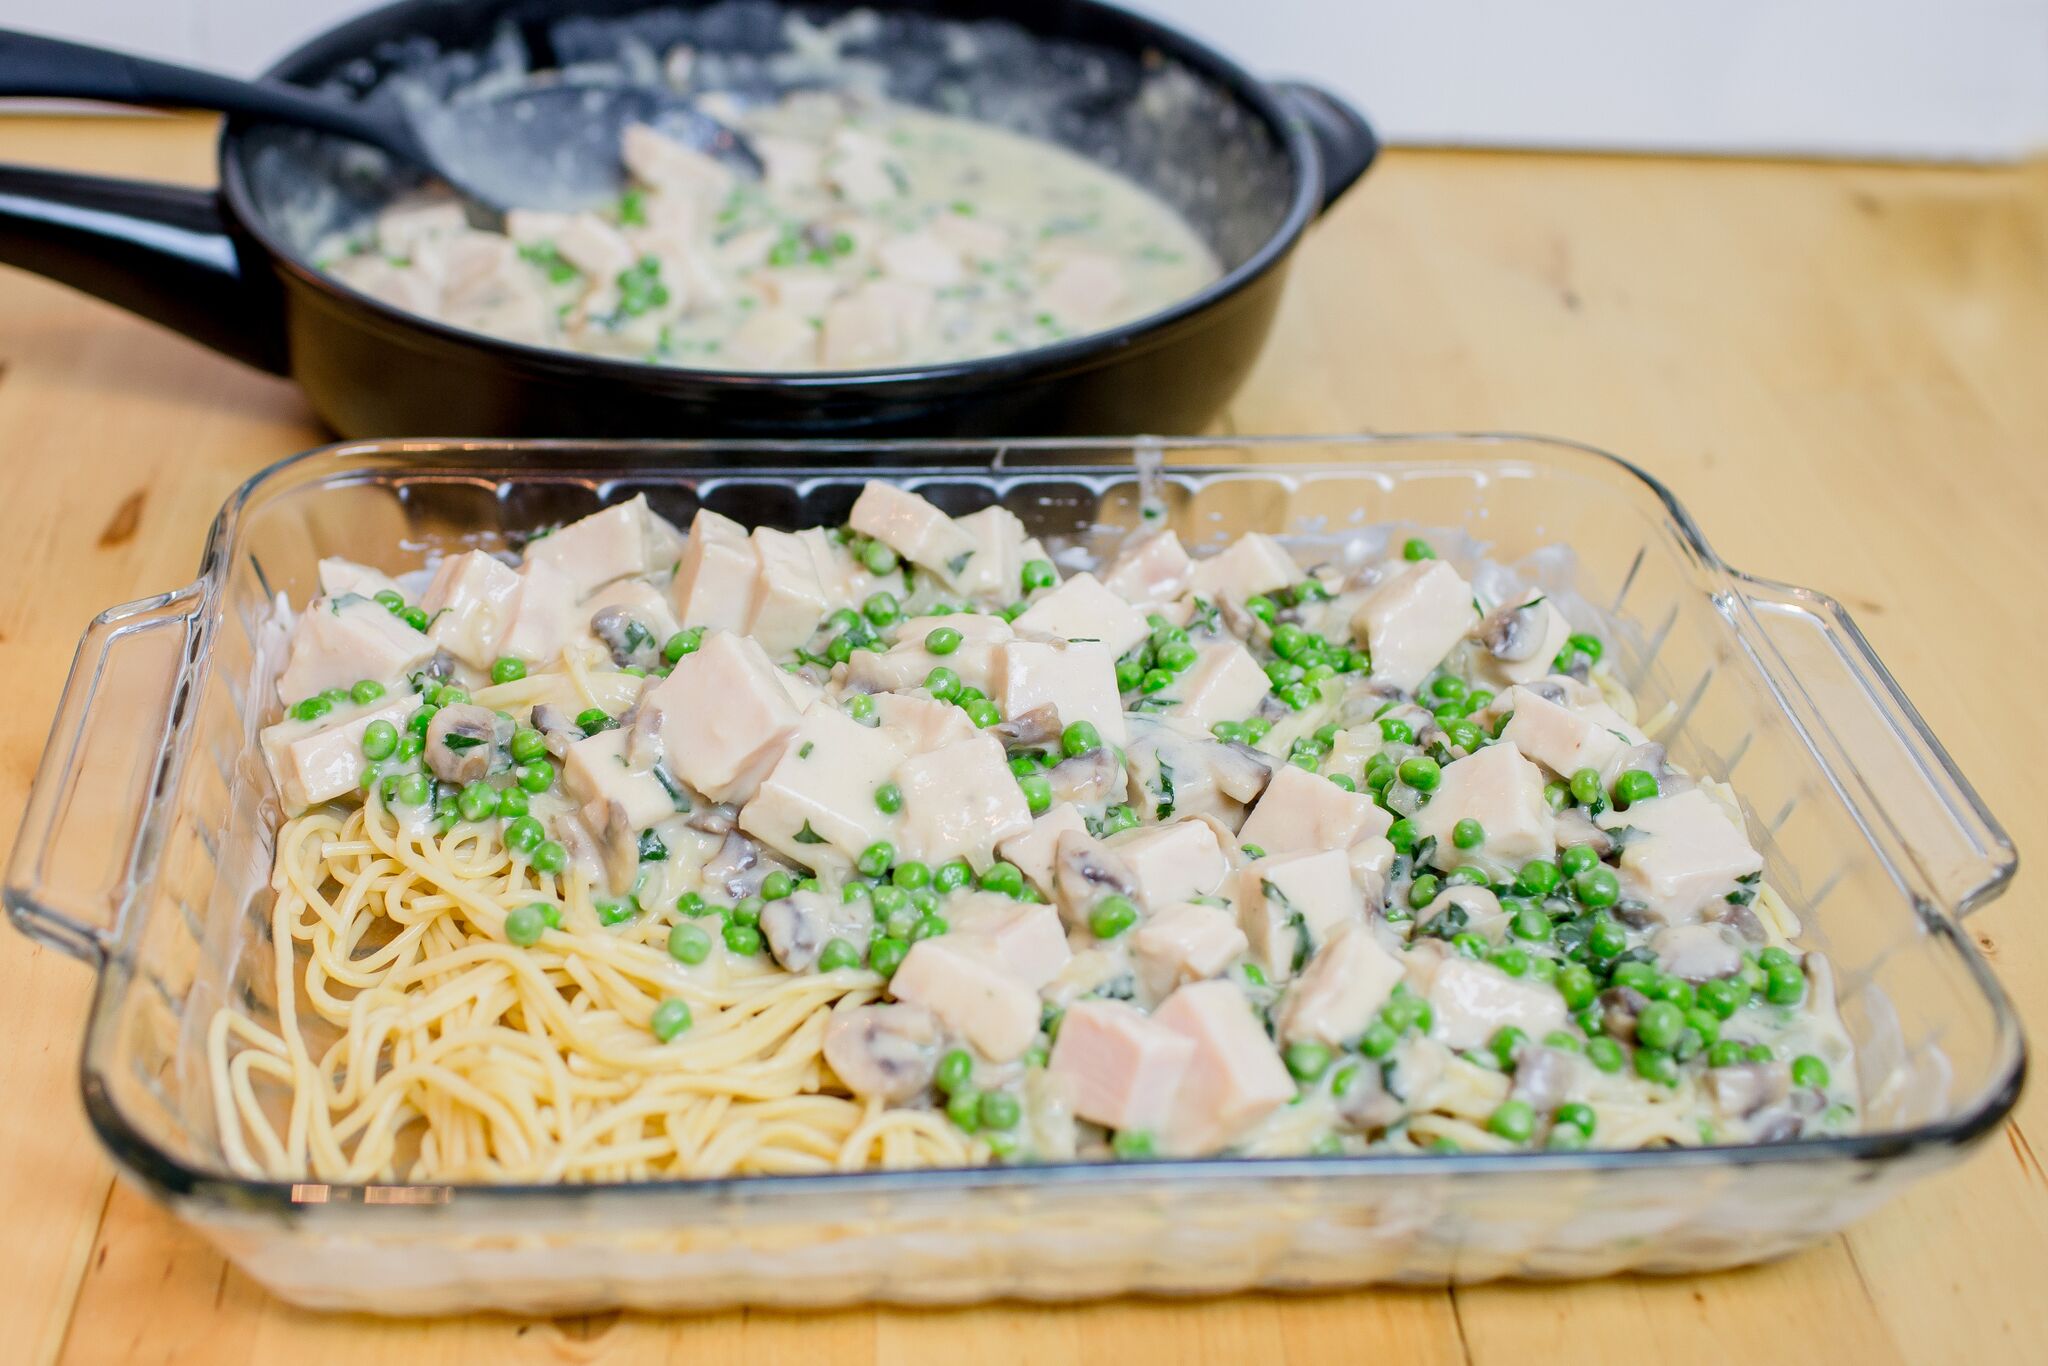 Got turkey leftovers? This Turkey Tetrazzini recipe is one creamy, comforting, and easy to make casserole recipe that will delight your whole family! 